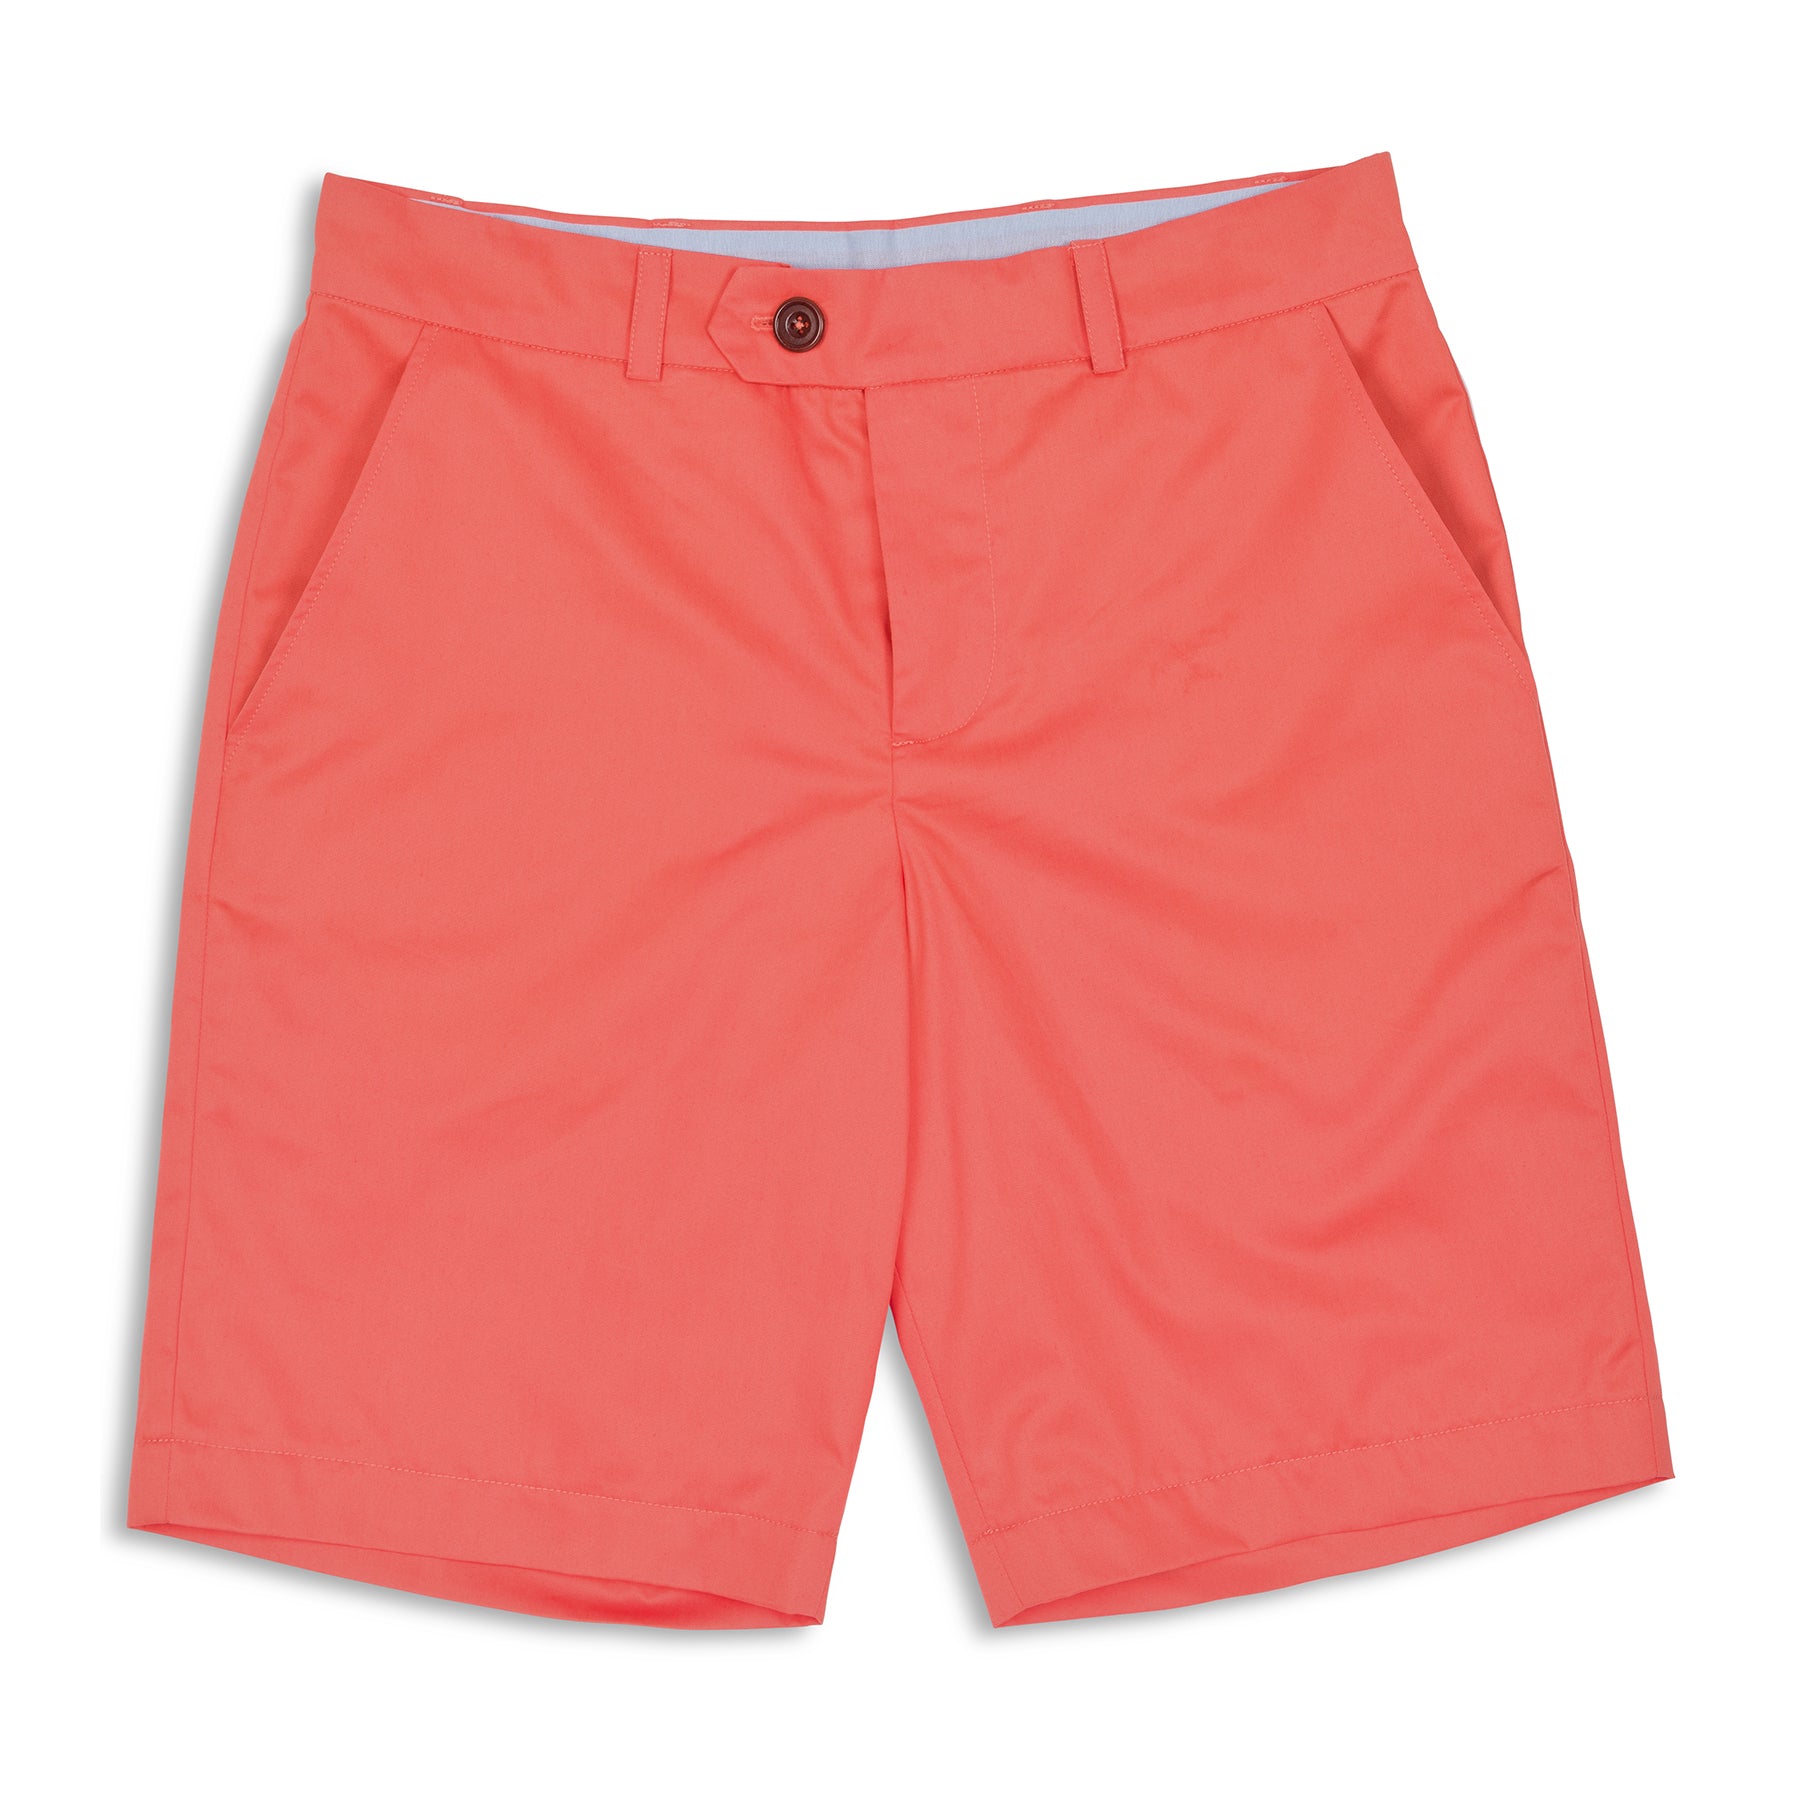 The Merchant Fox Cotton Shorts in Coral